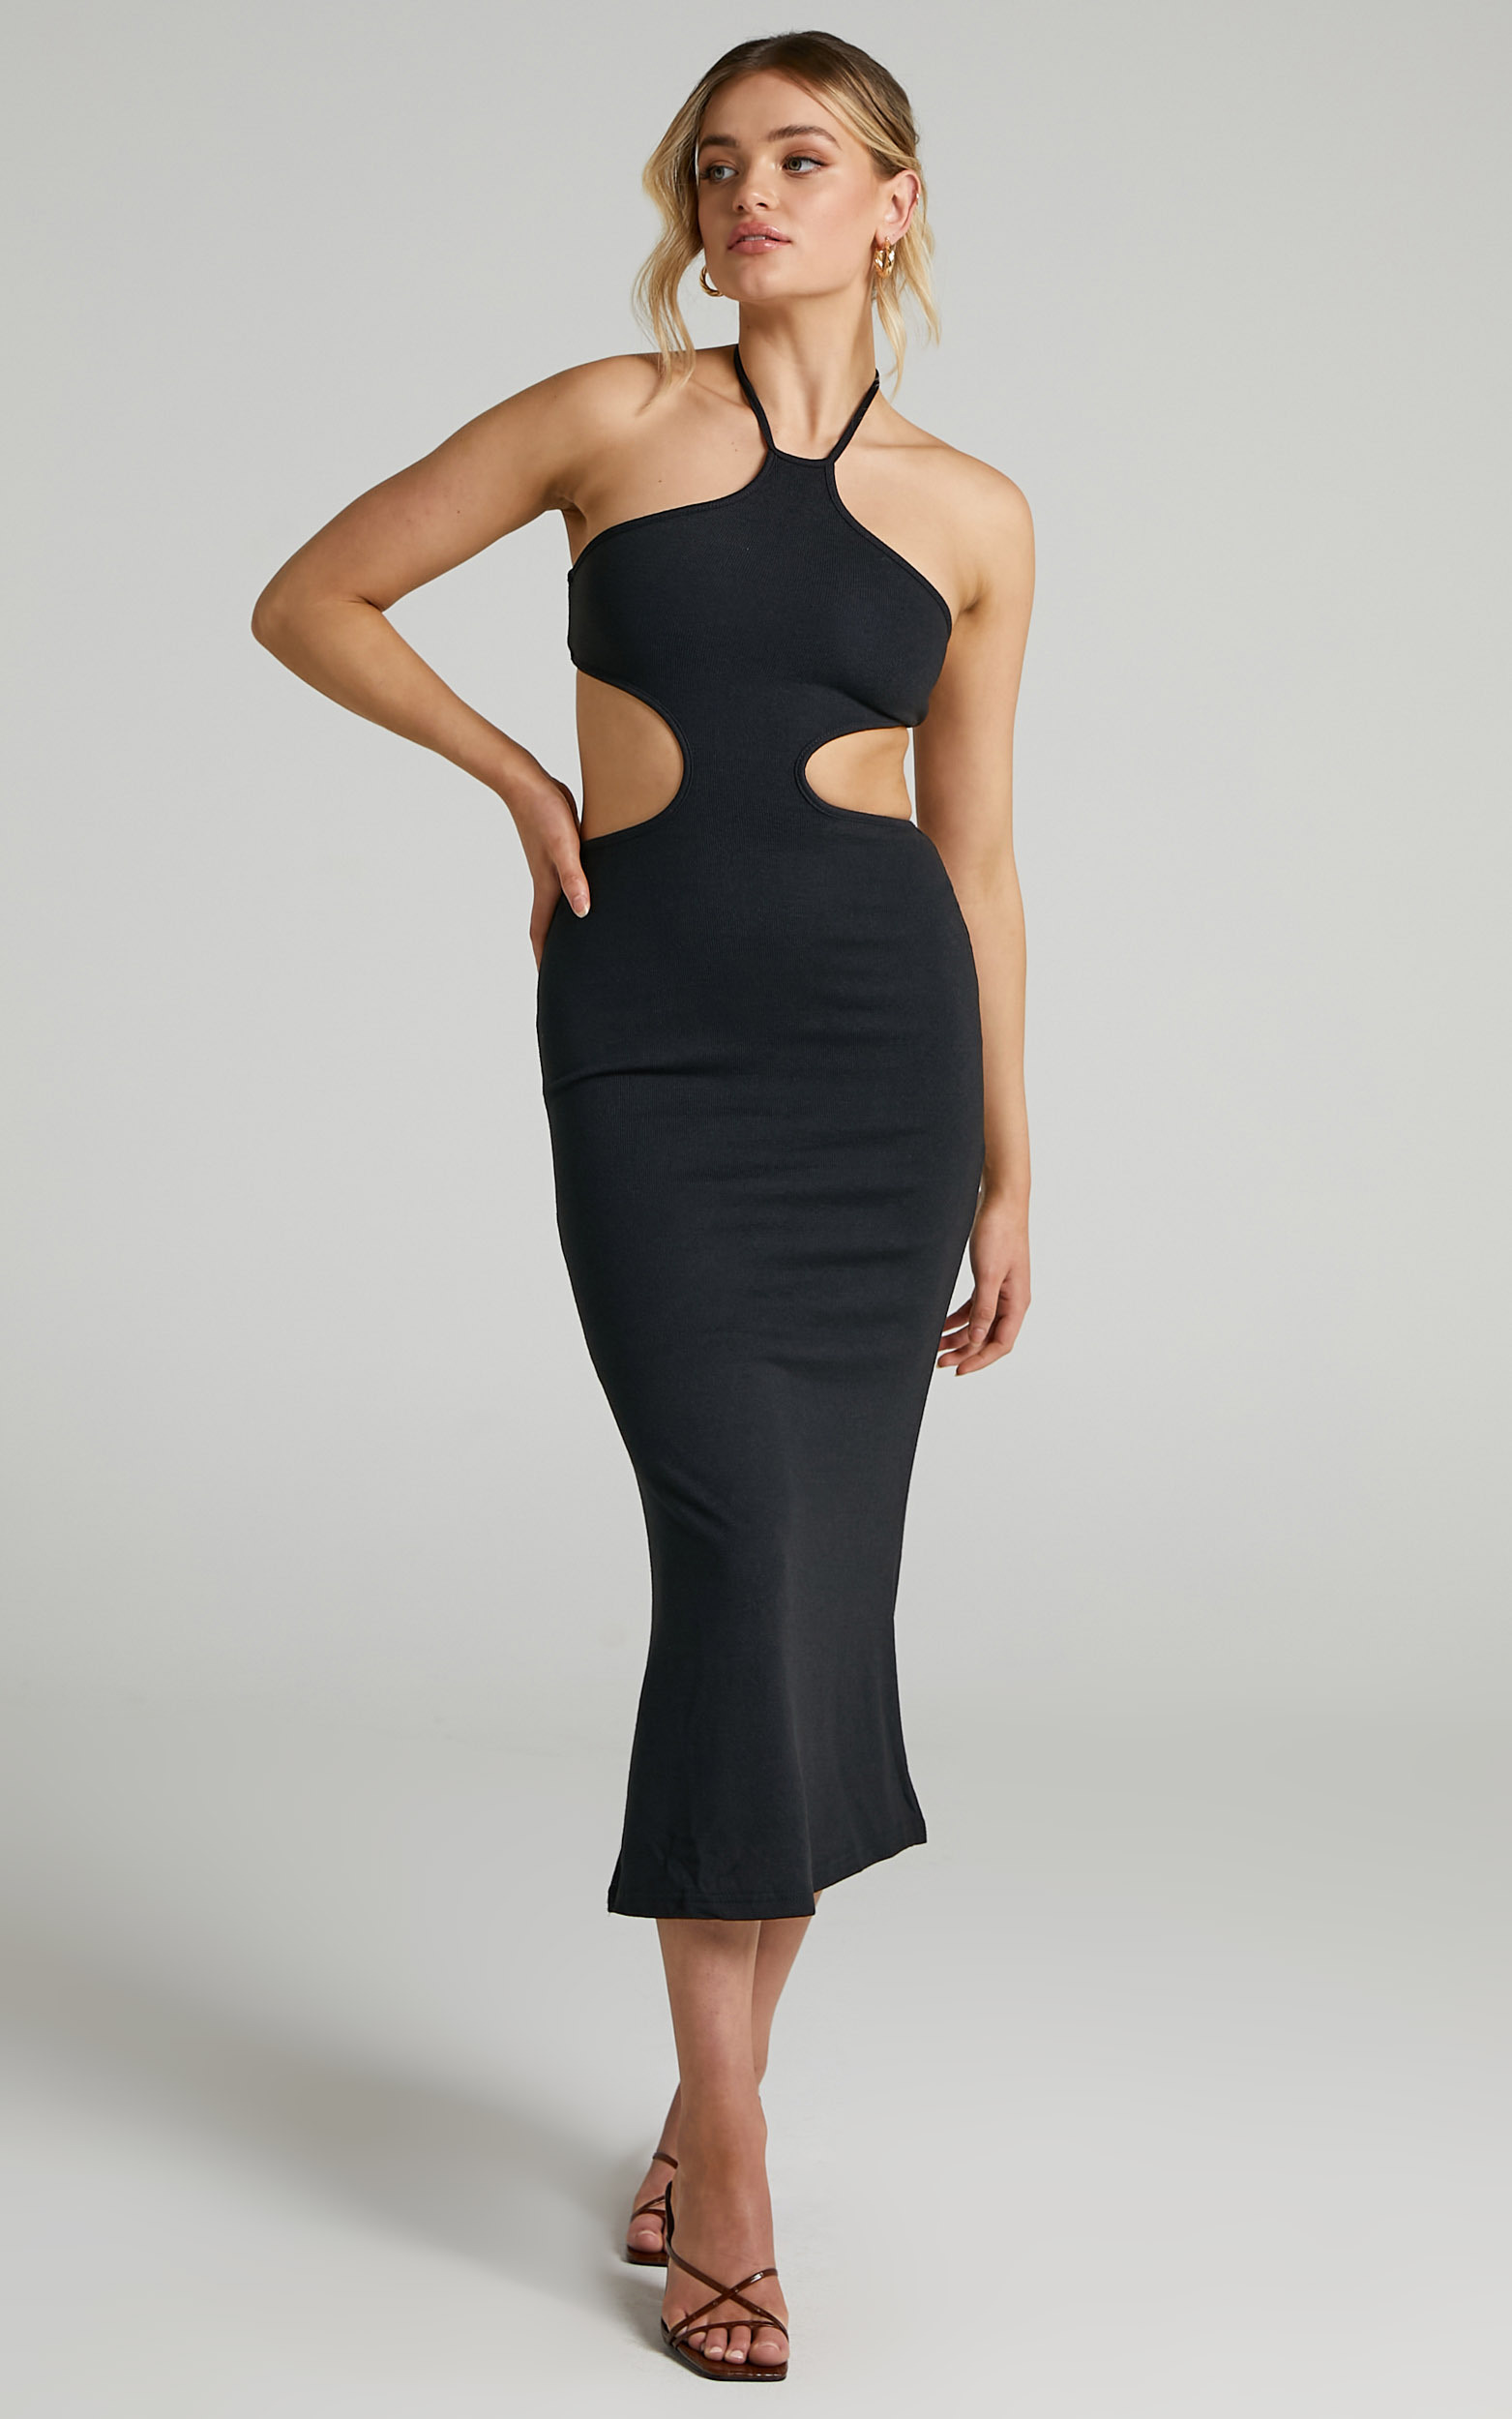 Saskia Side Cut Out Midi Dress in Black - 06, BLK1, hi-res image number null